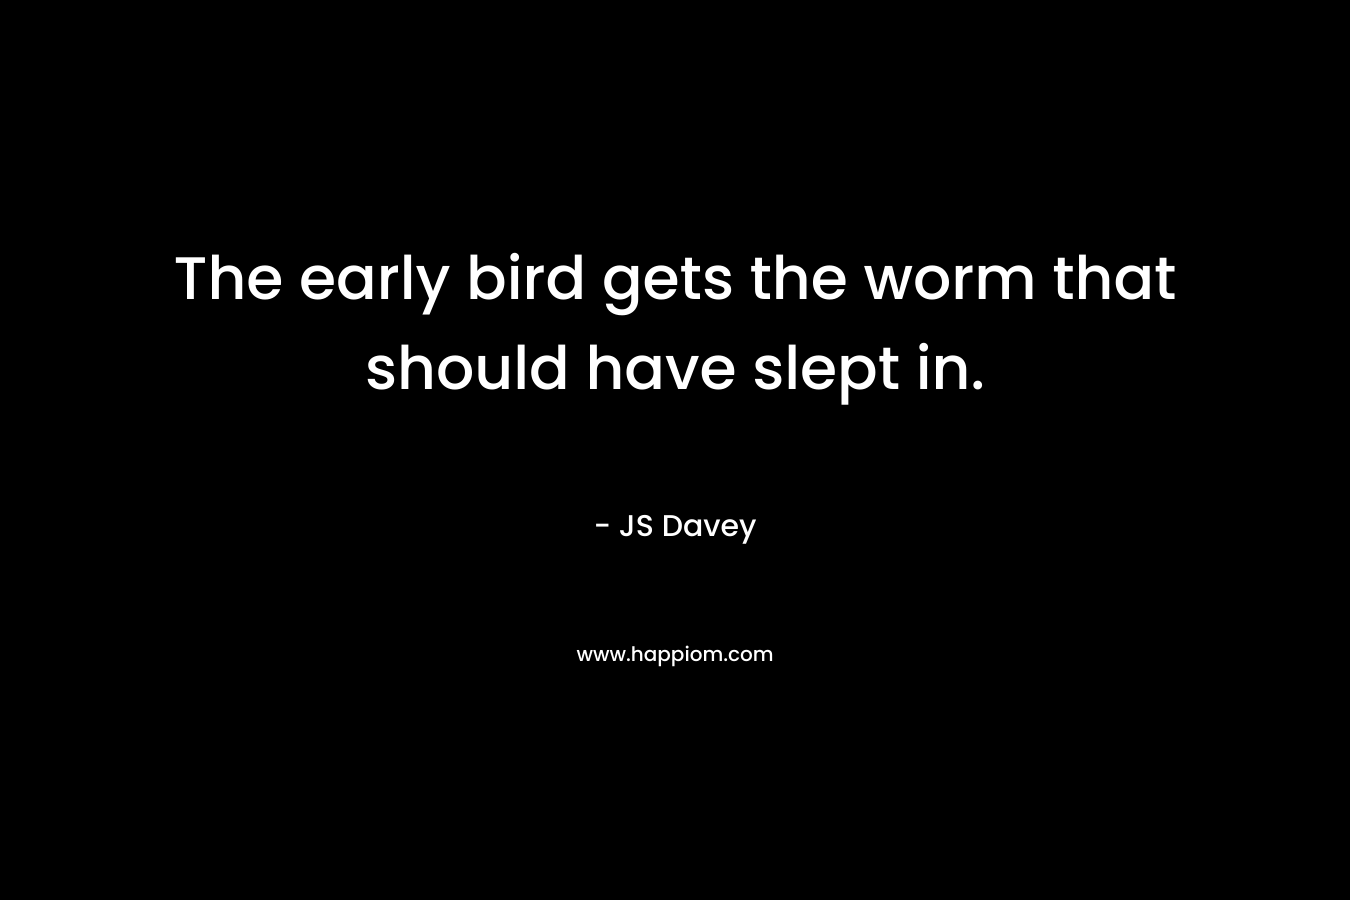 The early bird gets the worm that should have slept in. – JS Davey